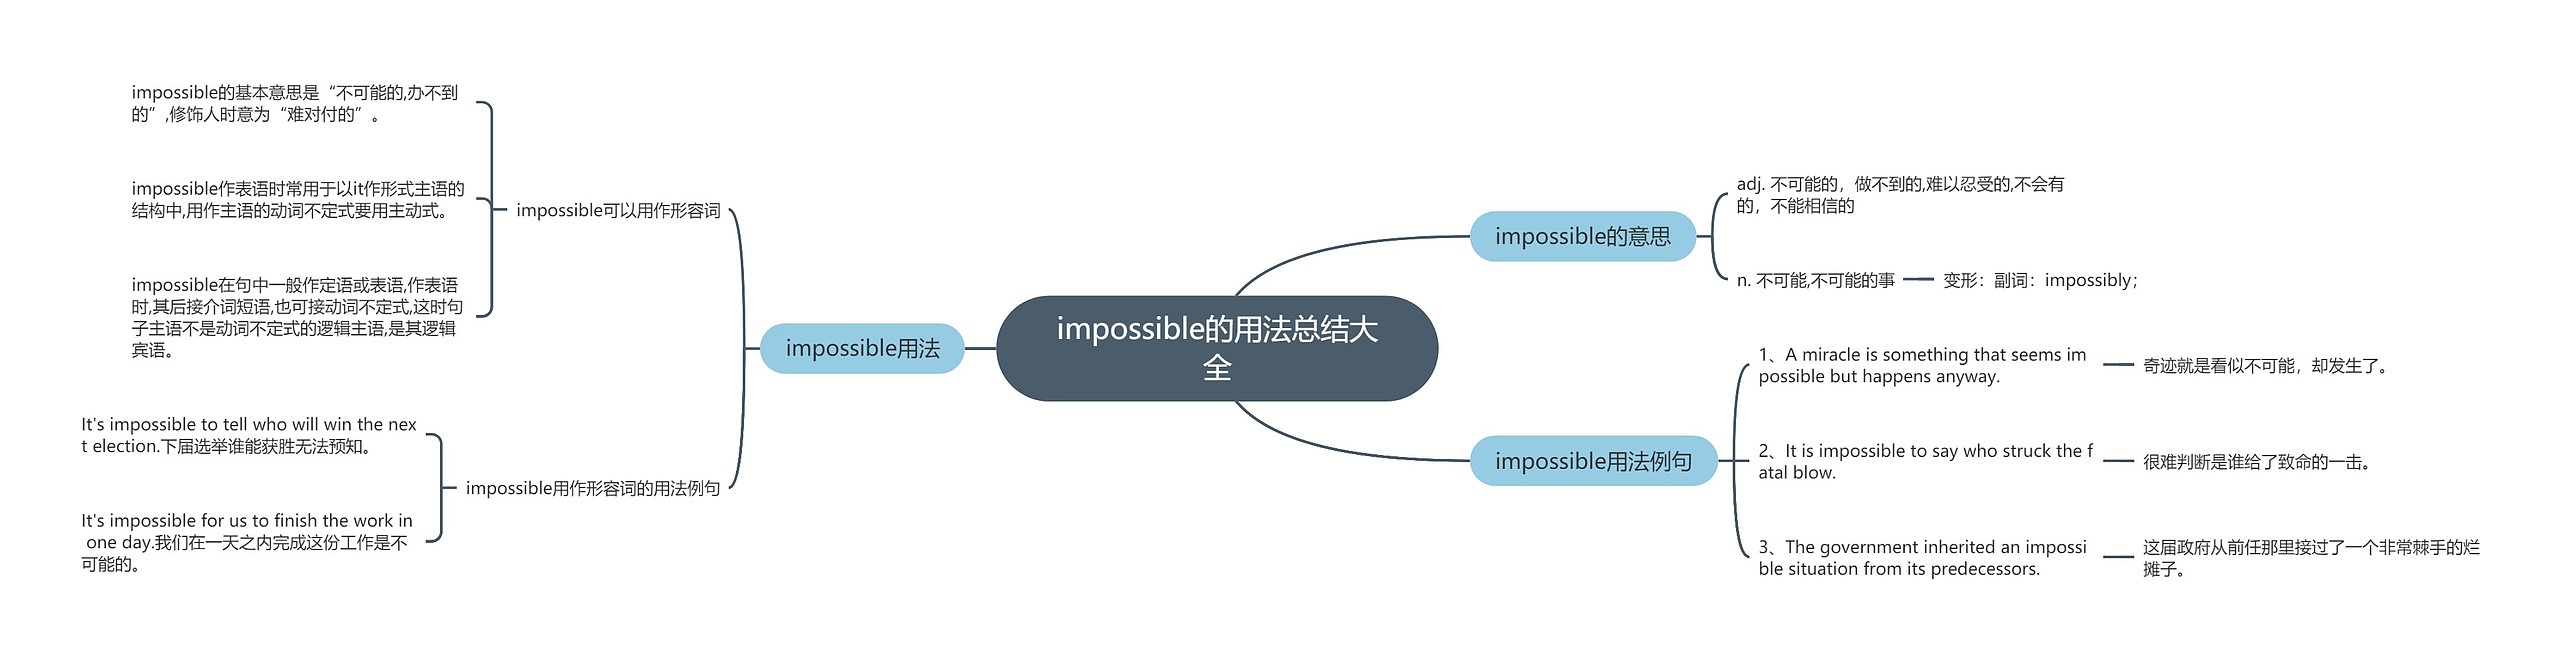 impossible的用法总结大全